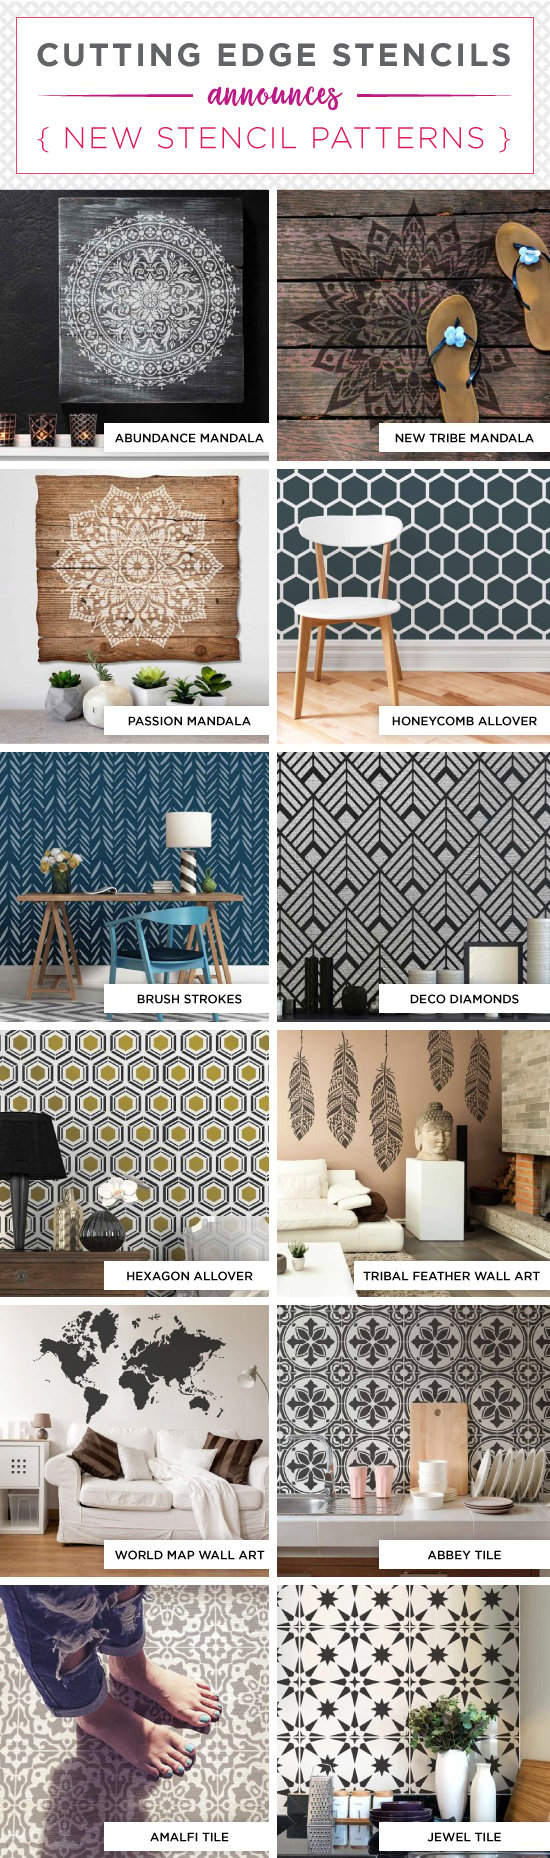 Cutting Edge Stencils shares a NEW collection of wall patterns that include Mandala designs, tile stencils, and geometrics. http://www.cuttingedgestencils.com/wall-stencils-stencil-designs.html